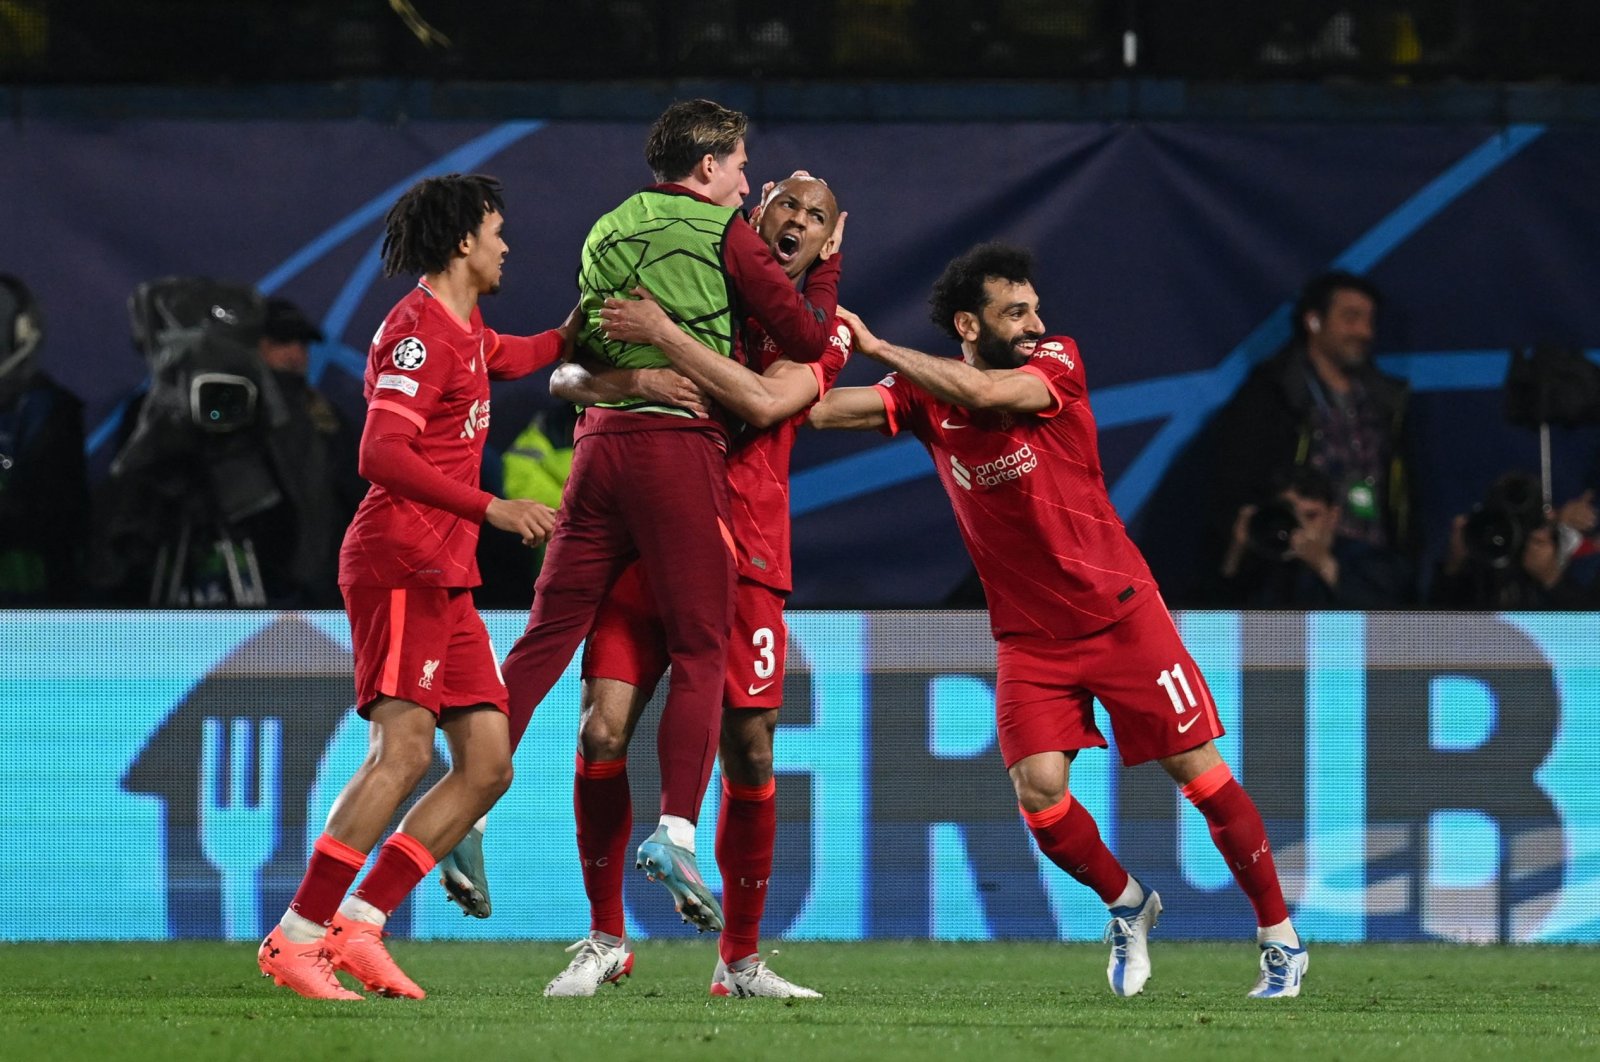 Liverpool players celebrate a goal in a Champions League semi against Villarreal CF, Vila-real, Spain, May 3, 2022. (AFP Photo)